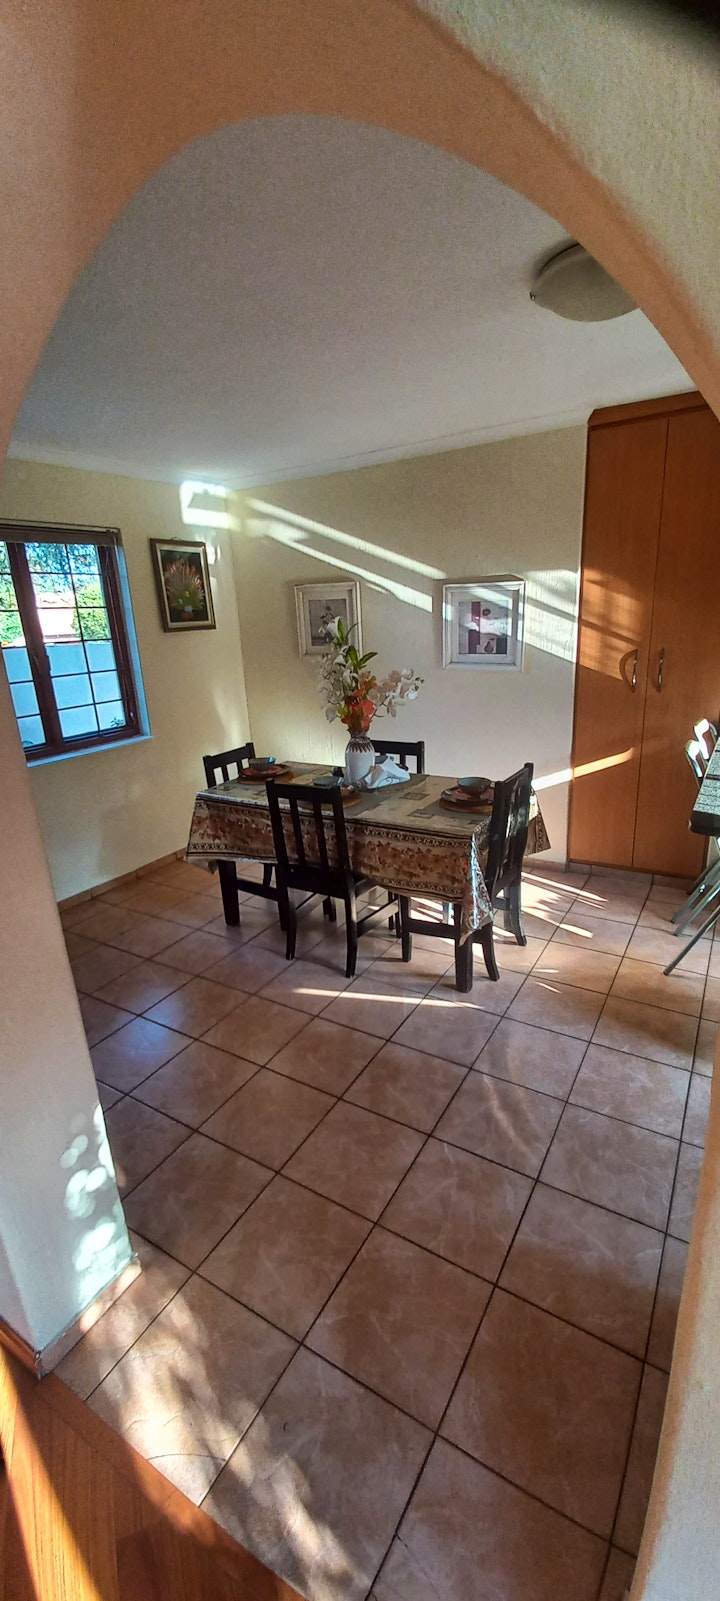 Gauteng Accommodation at Cottage on Pipers | Viya